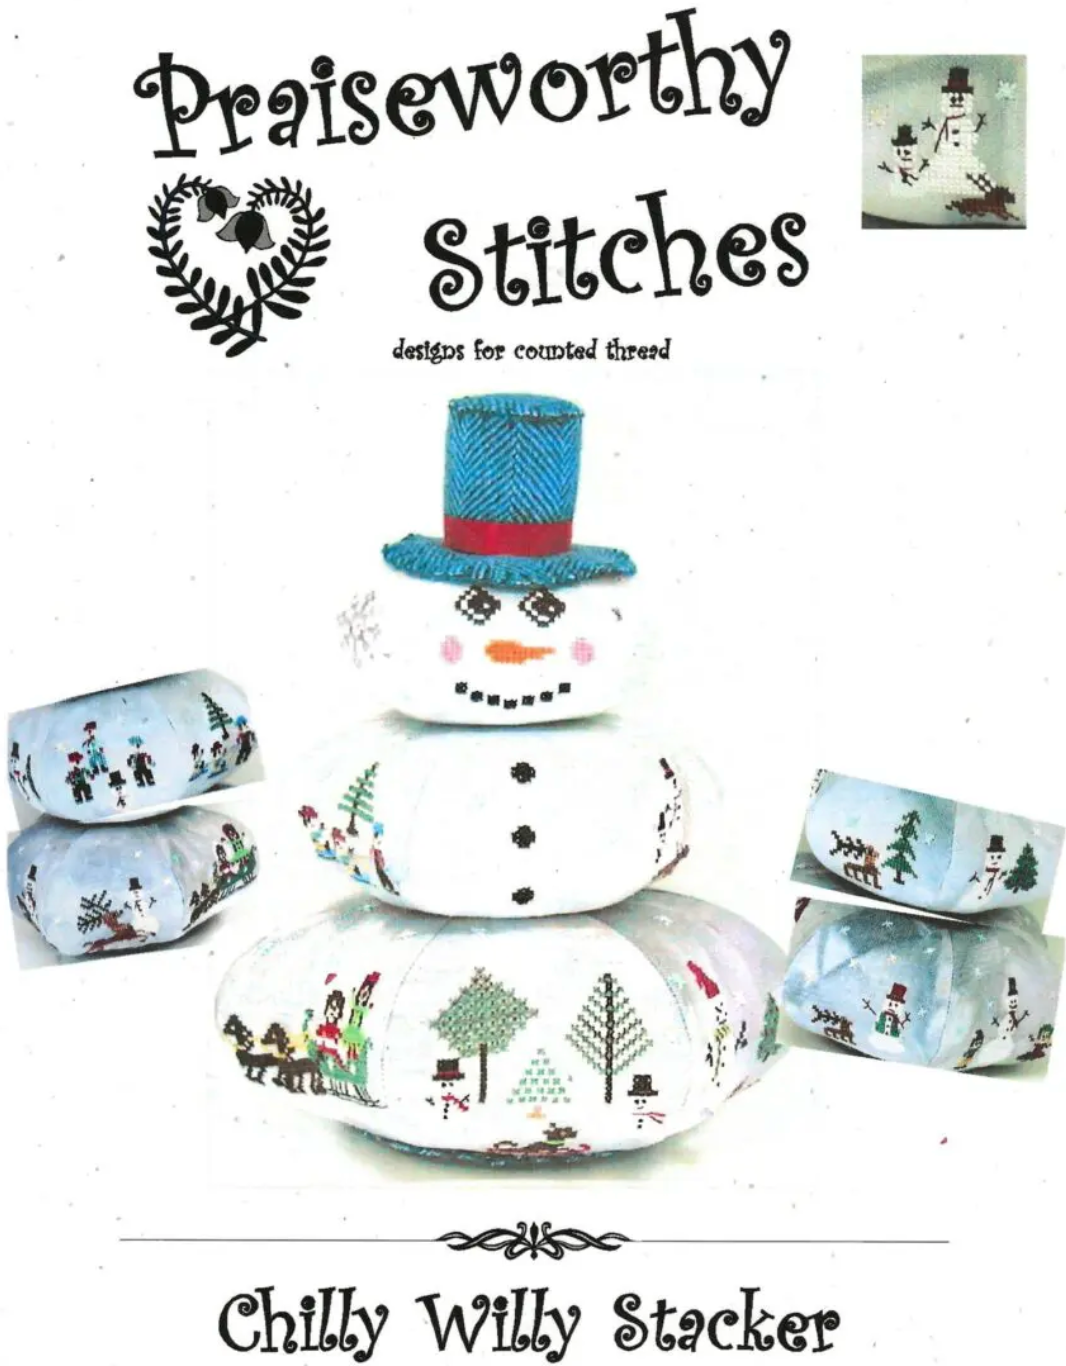 Praiseworthy Stitches - Chilly Willy Stacker